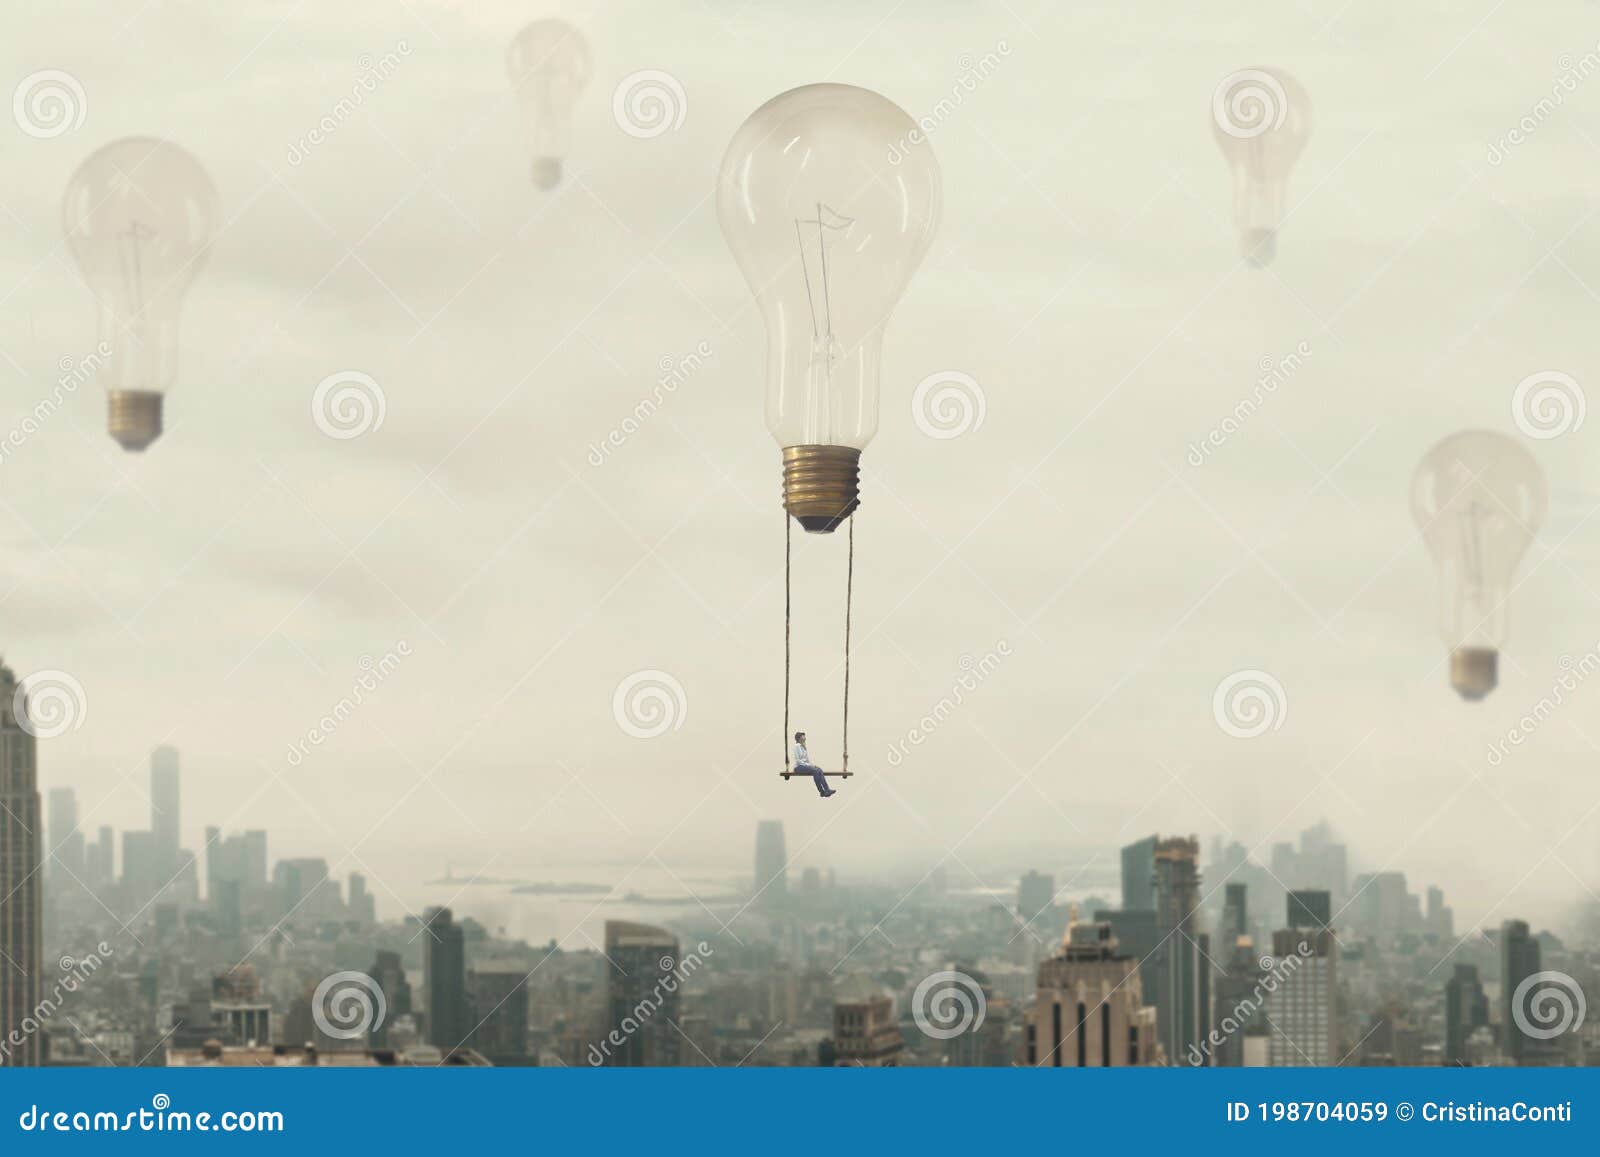 surreal moment of a woman traveling on a swing carried by a light bulb over a metropolis